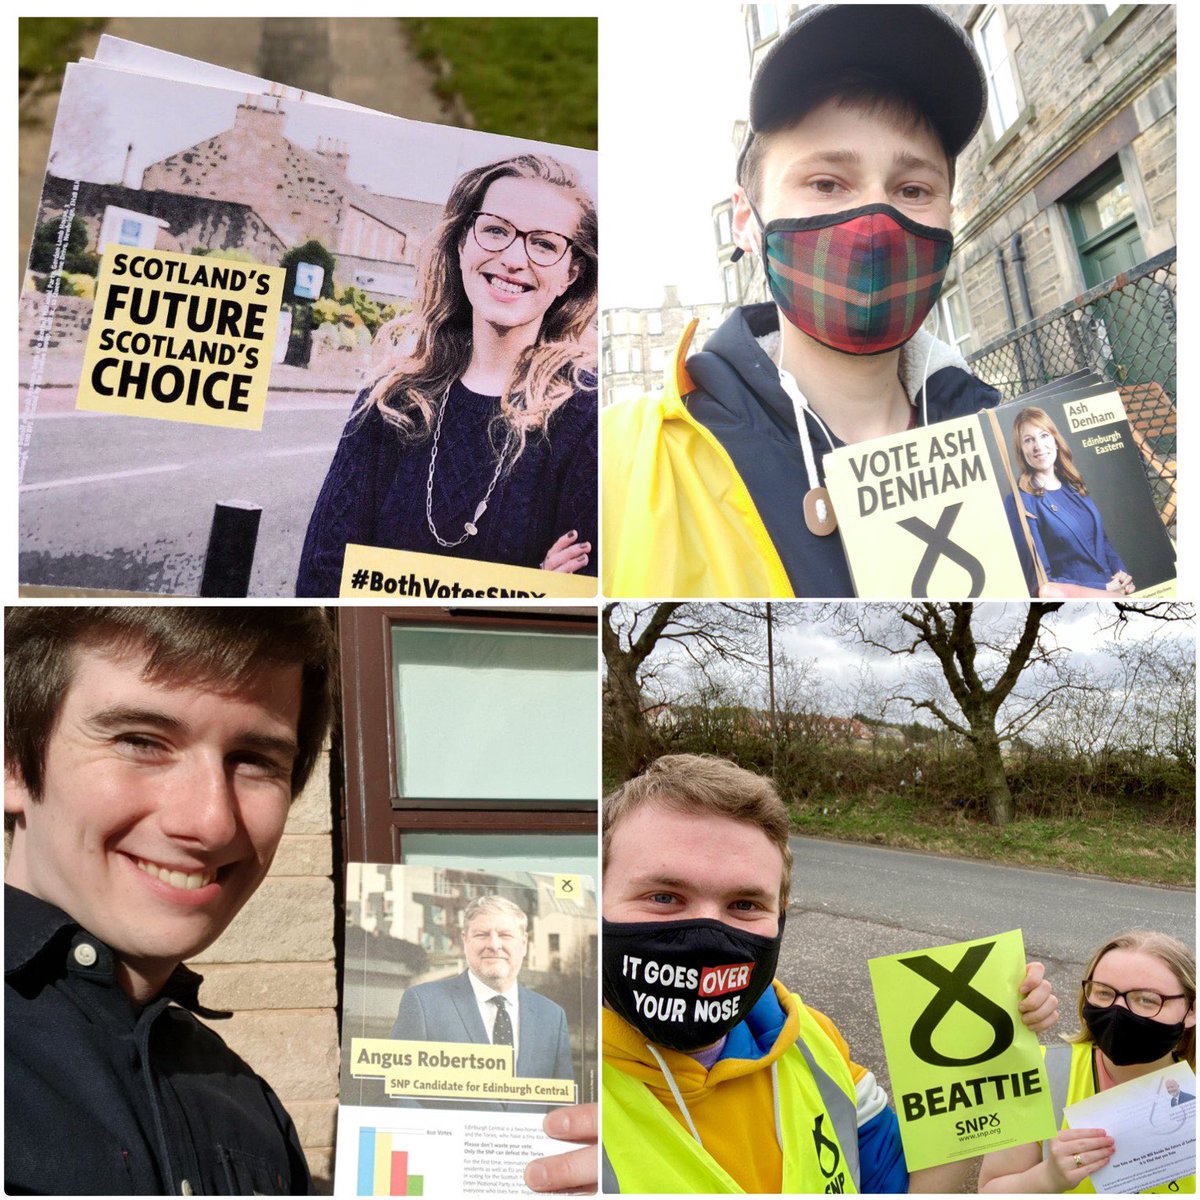 Our members have been campaigning all across Lothian over the last few days for our fantastic SNP candidates! 

Less than 30 days to go folks, let’s make sure that on the 6th of May it’s #BothVotesSNP 🗳 #ActiveSNP #ActiveYSI